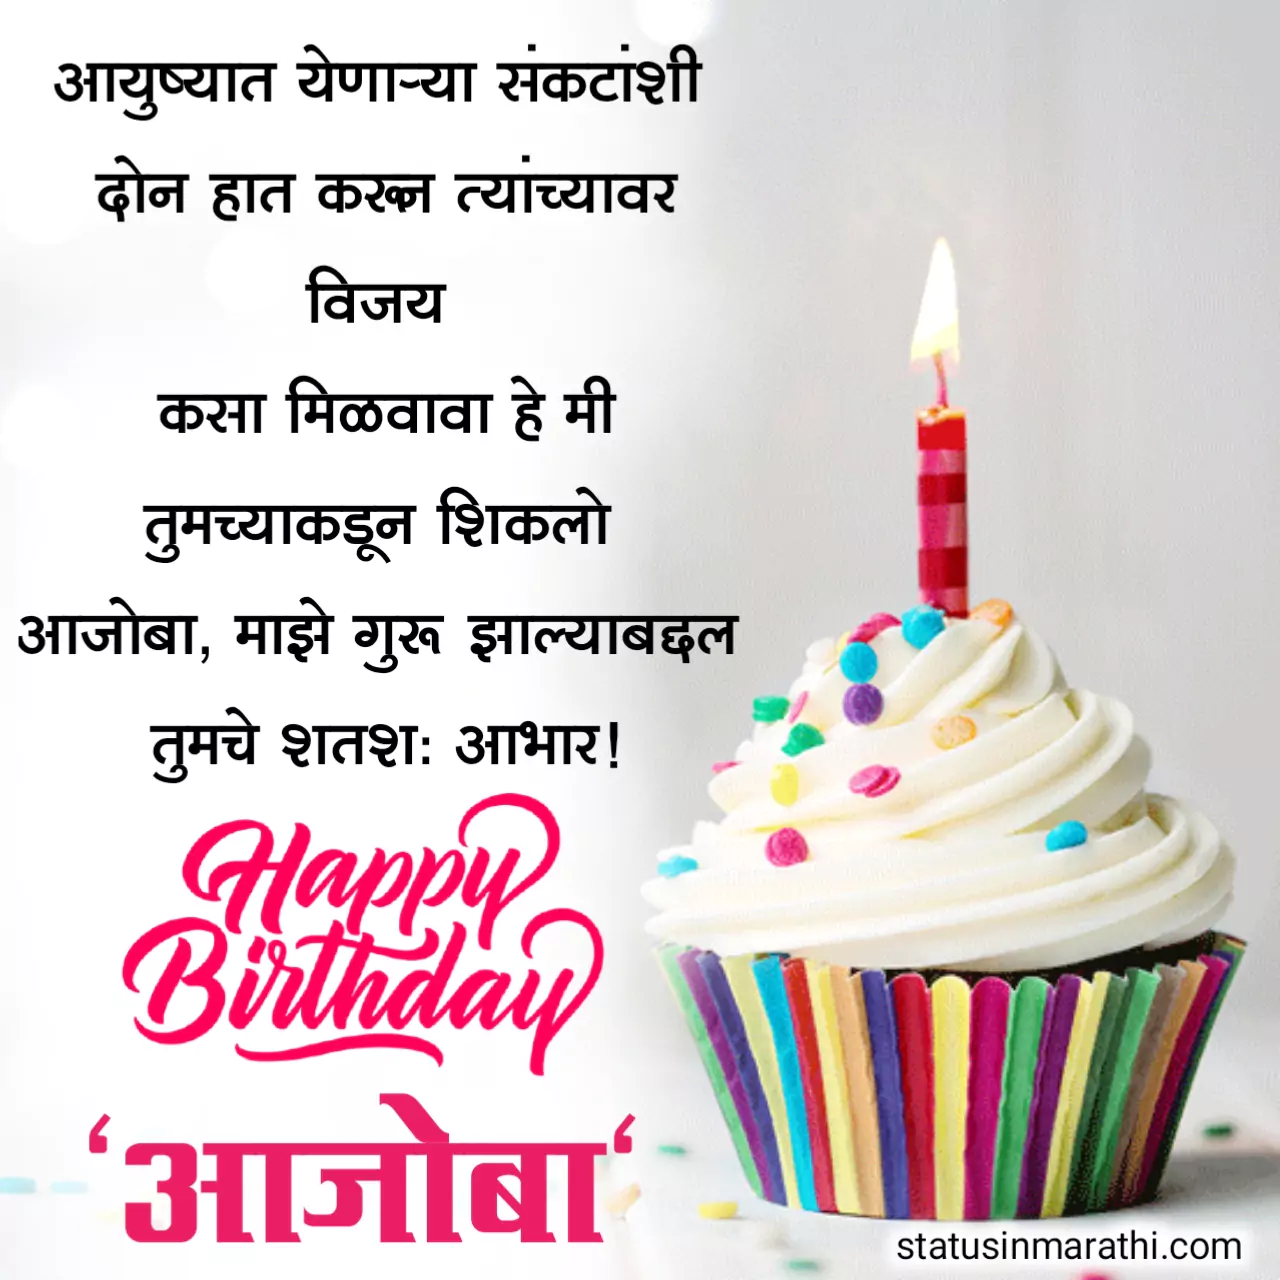 Happy Birthday Image for grandfather in marathi